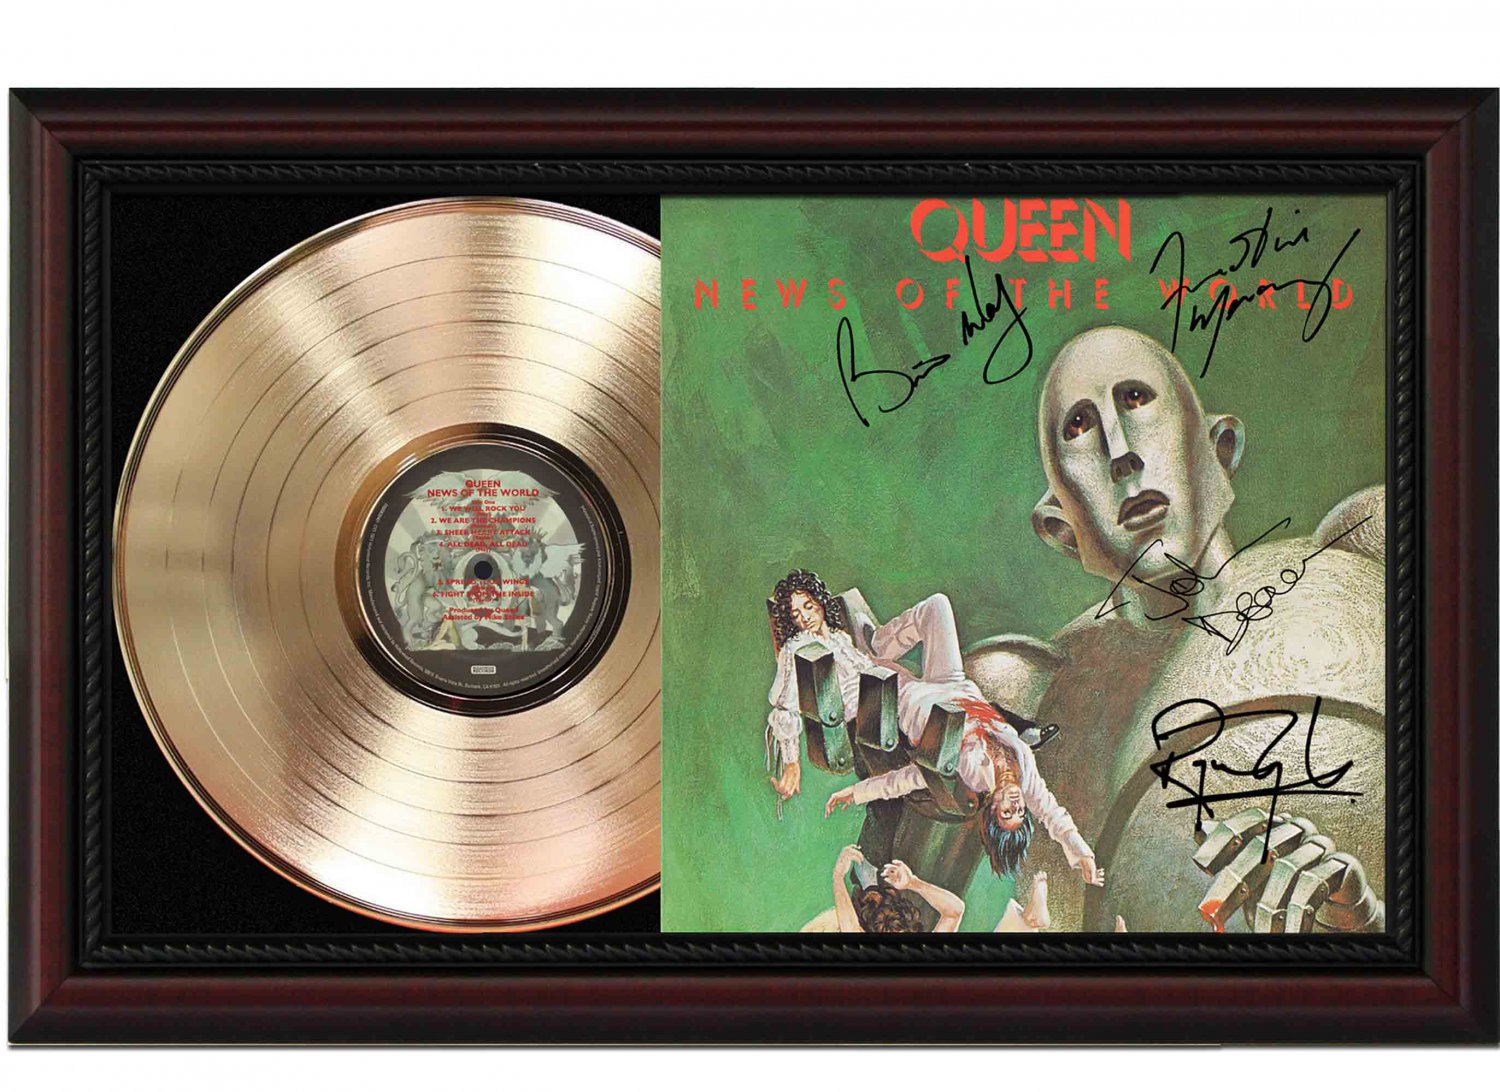 Queen  "News of the World"  Framed Record Display.